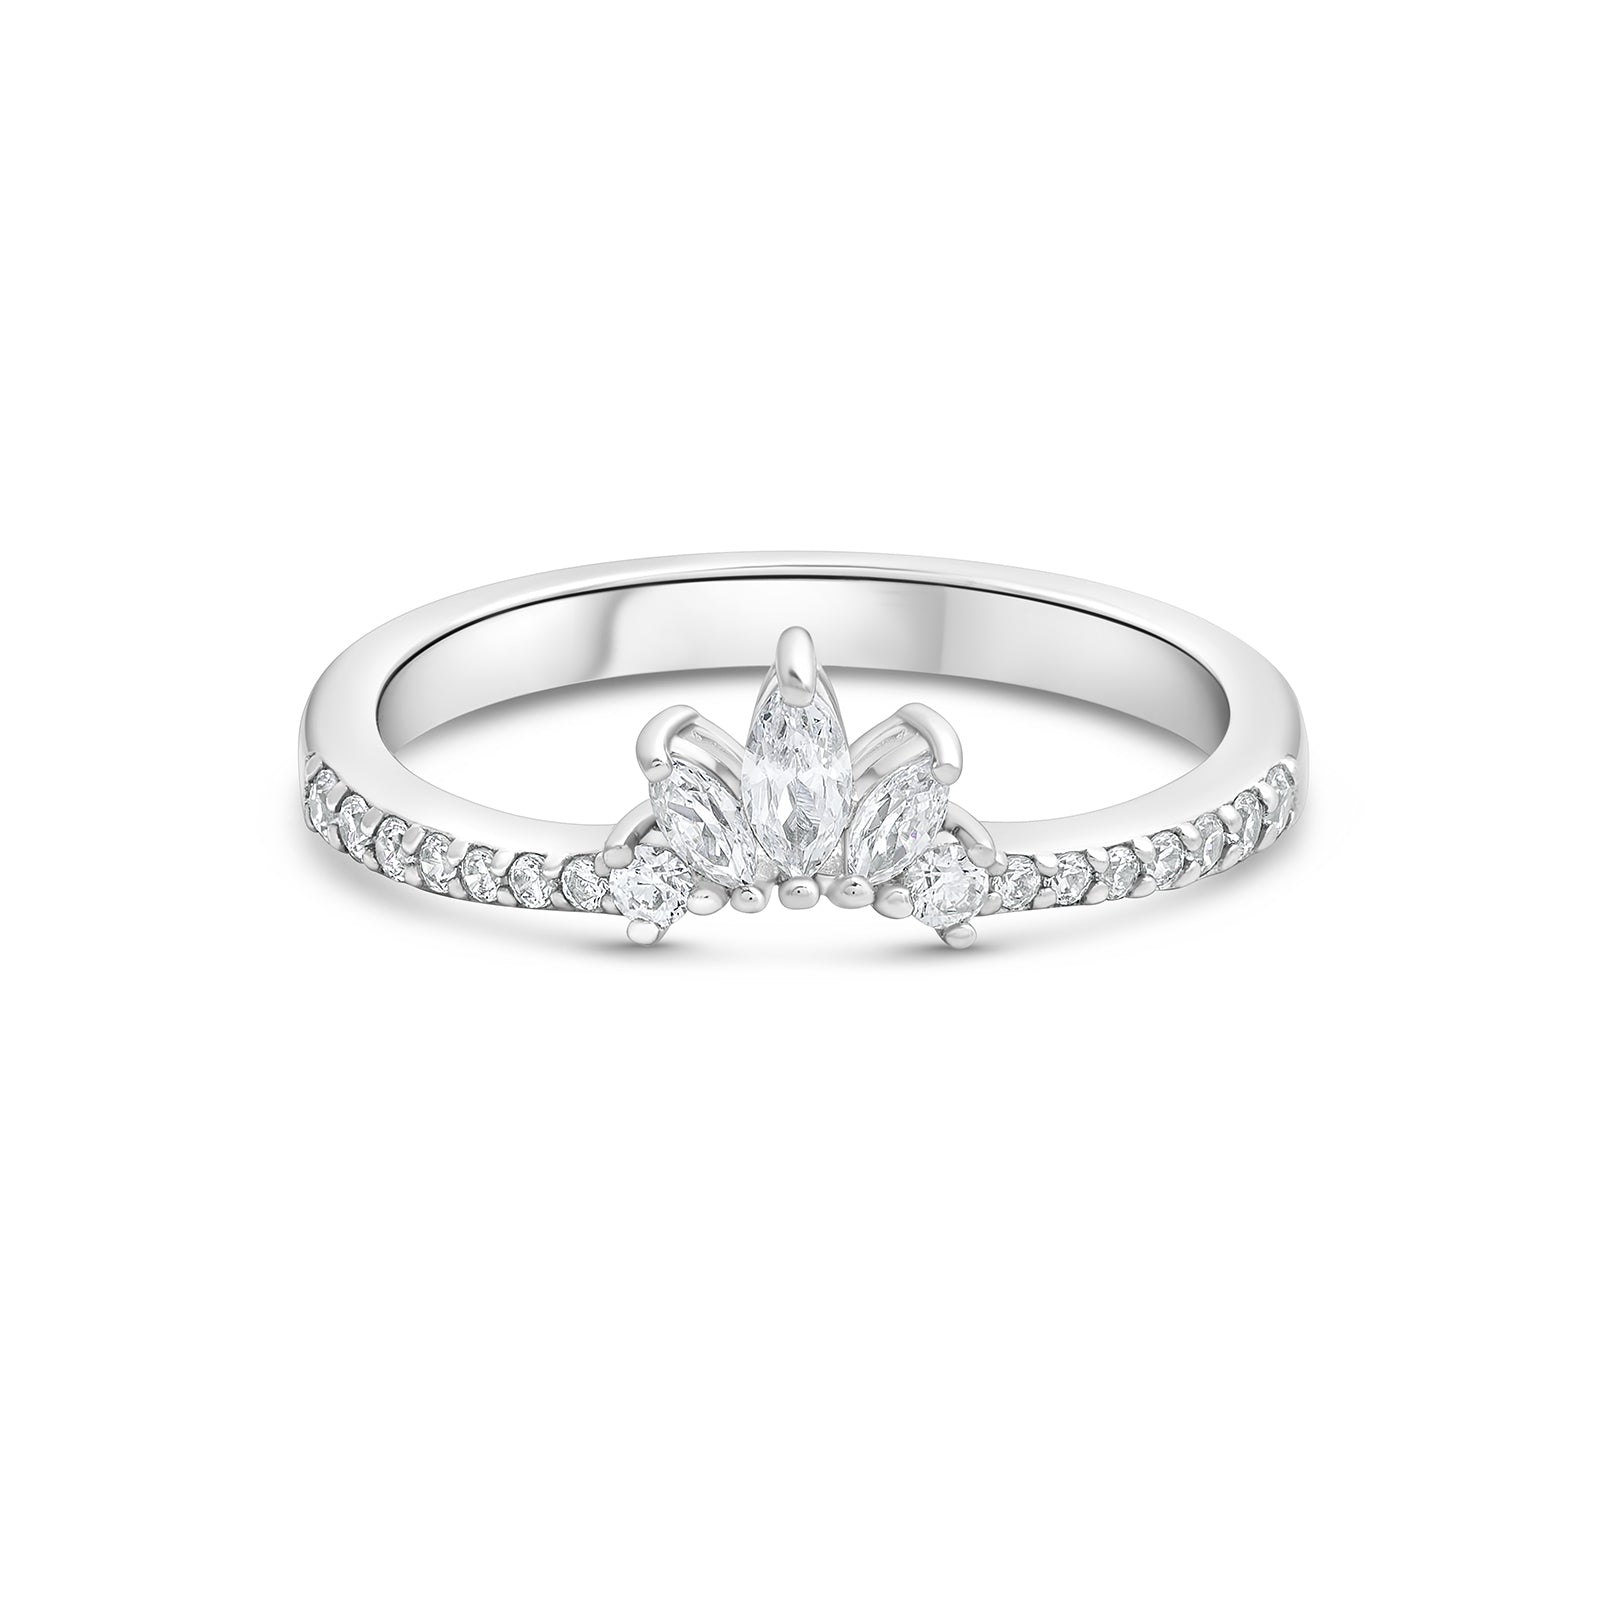  The exquisite v-shaped band features 3 center marquise stones with round stones glistening down the sides shown in silver